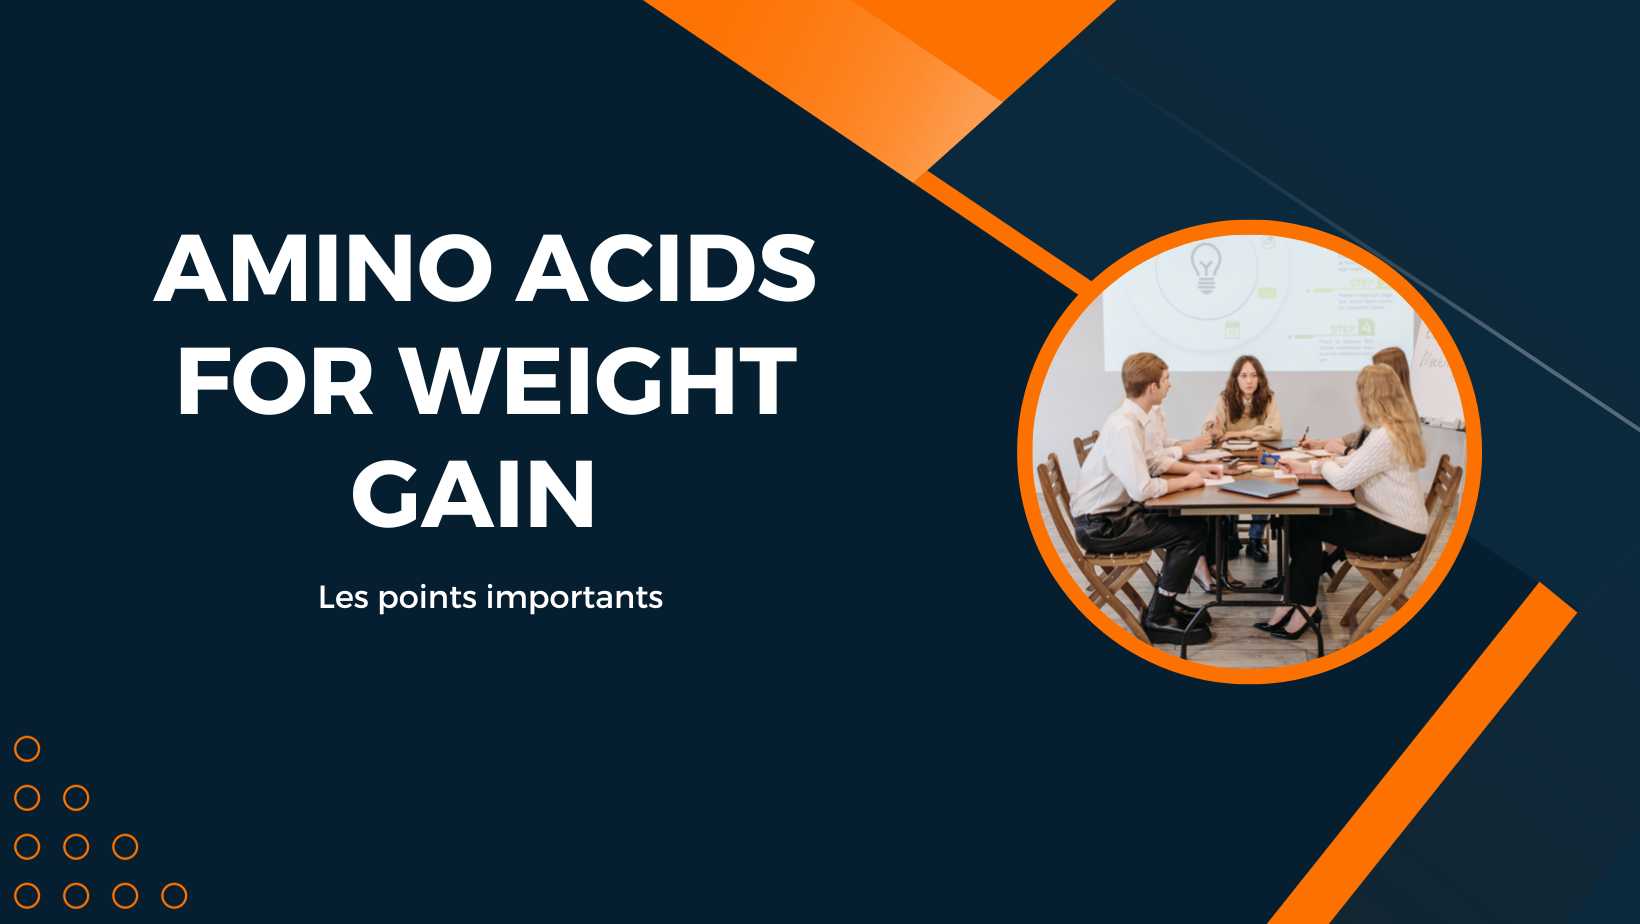 amino acids for weight gain | Les points importants